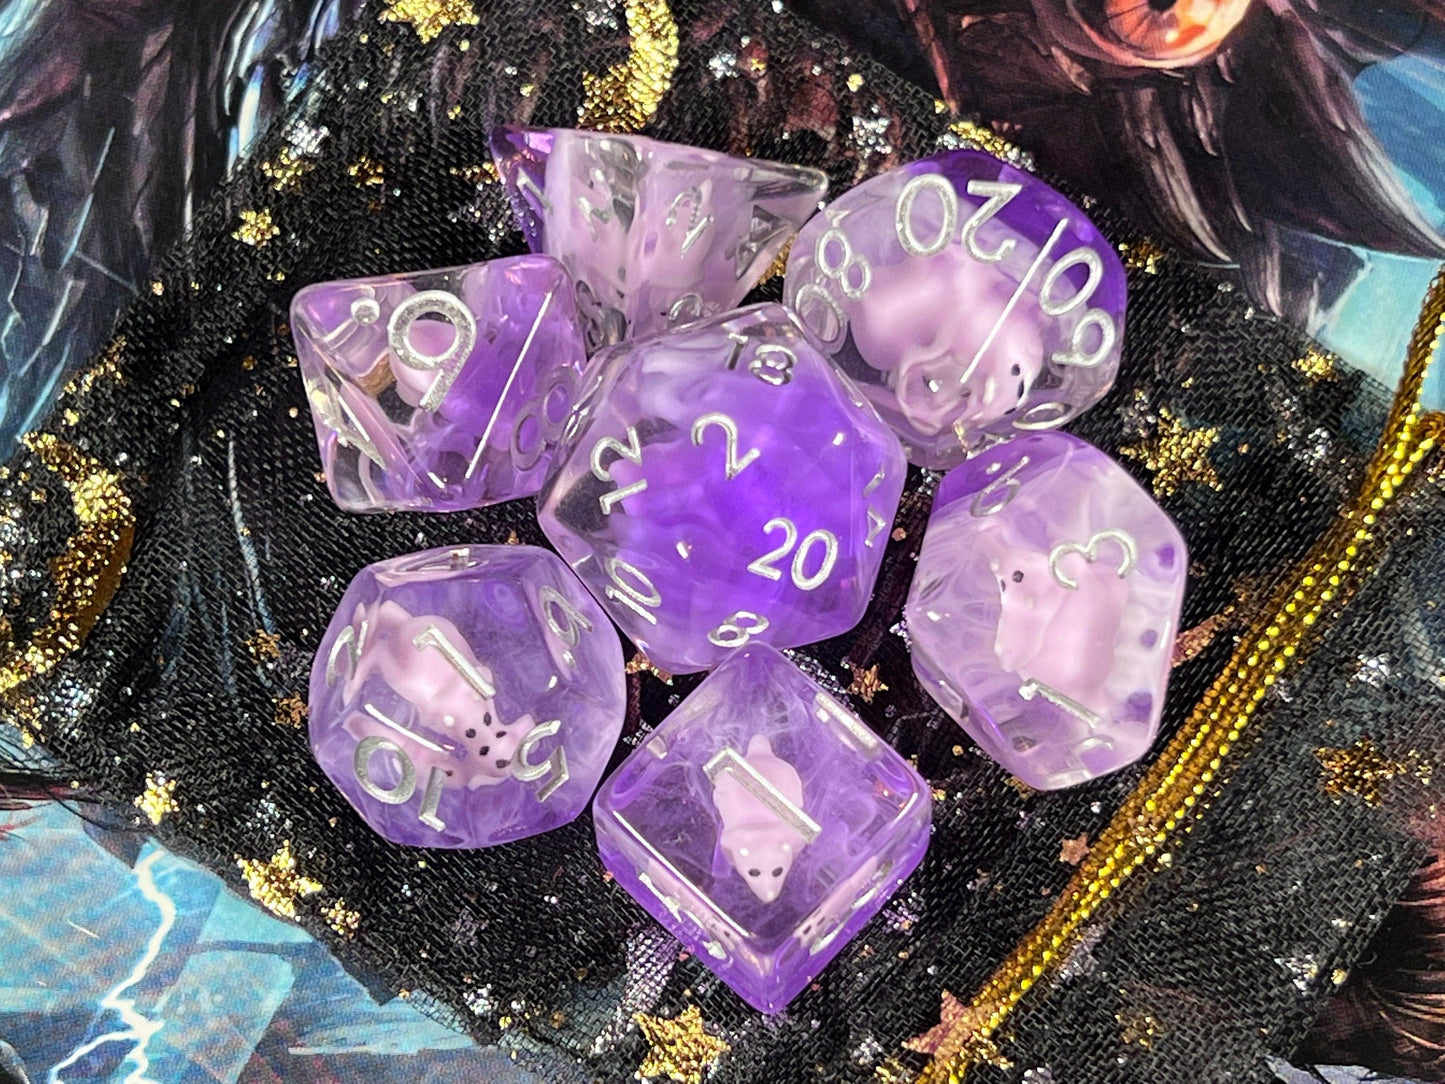 The Crooked Tavern Dice Sets Pink Baby Dinosaur RPG Dice Set | Cute Baby Triceratops Inside!